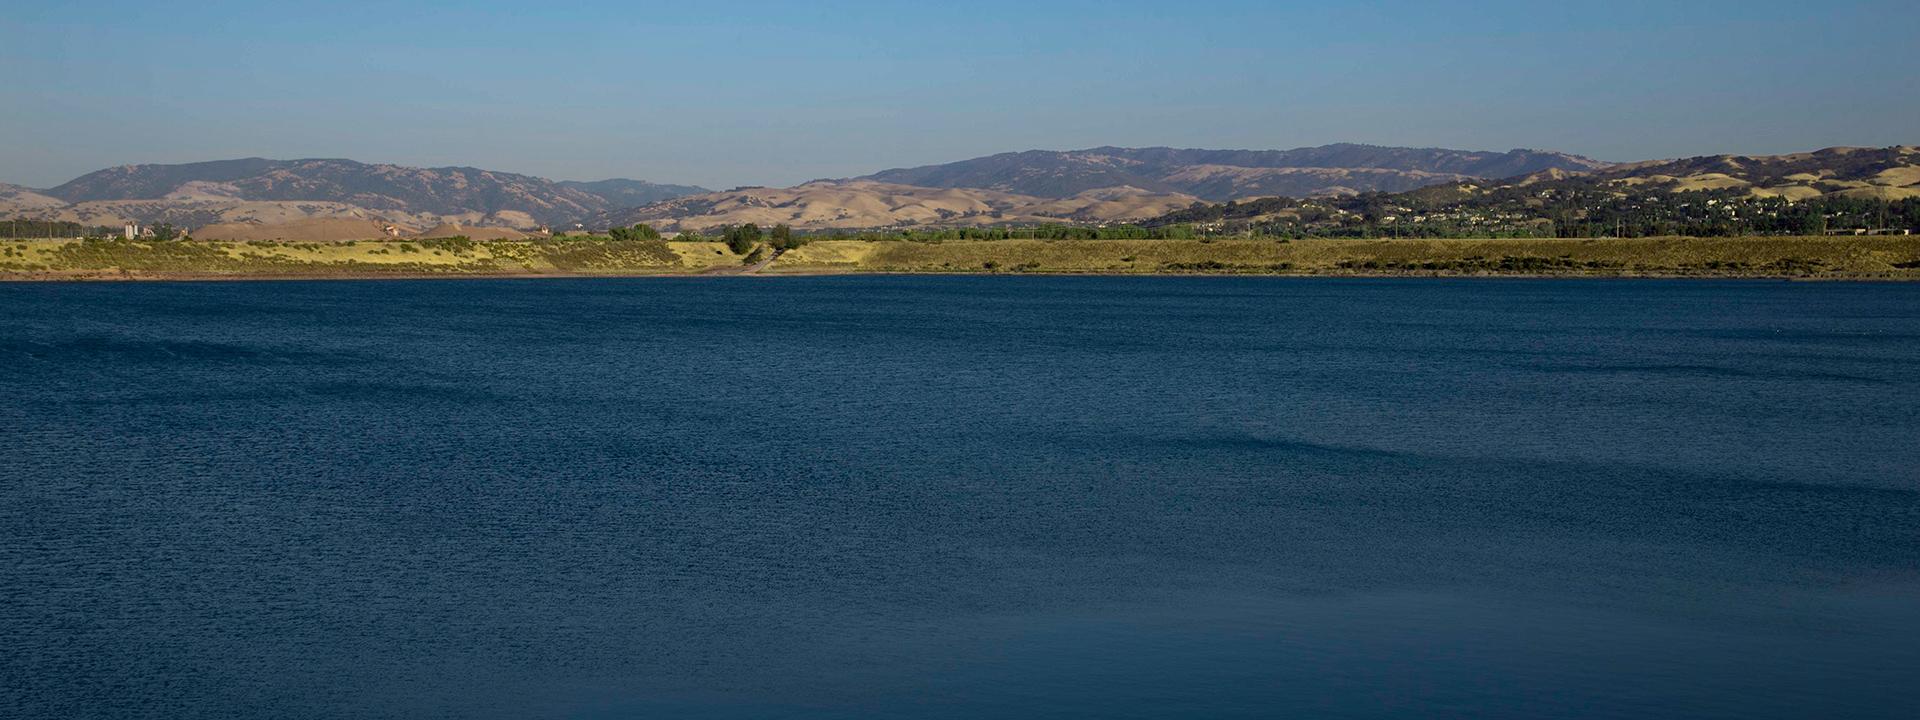 Chain of Lakes with city of Pleasanton and mountains in the background